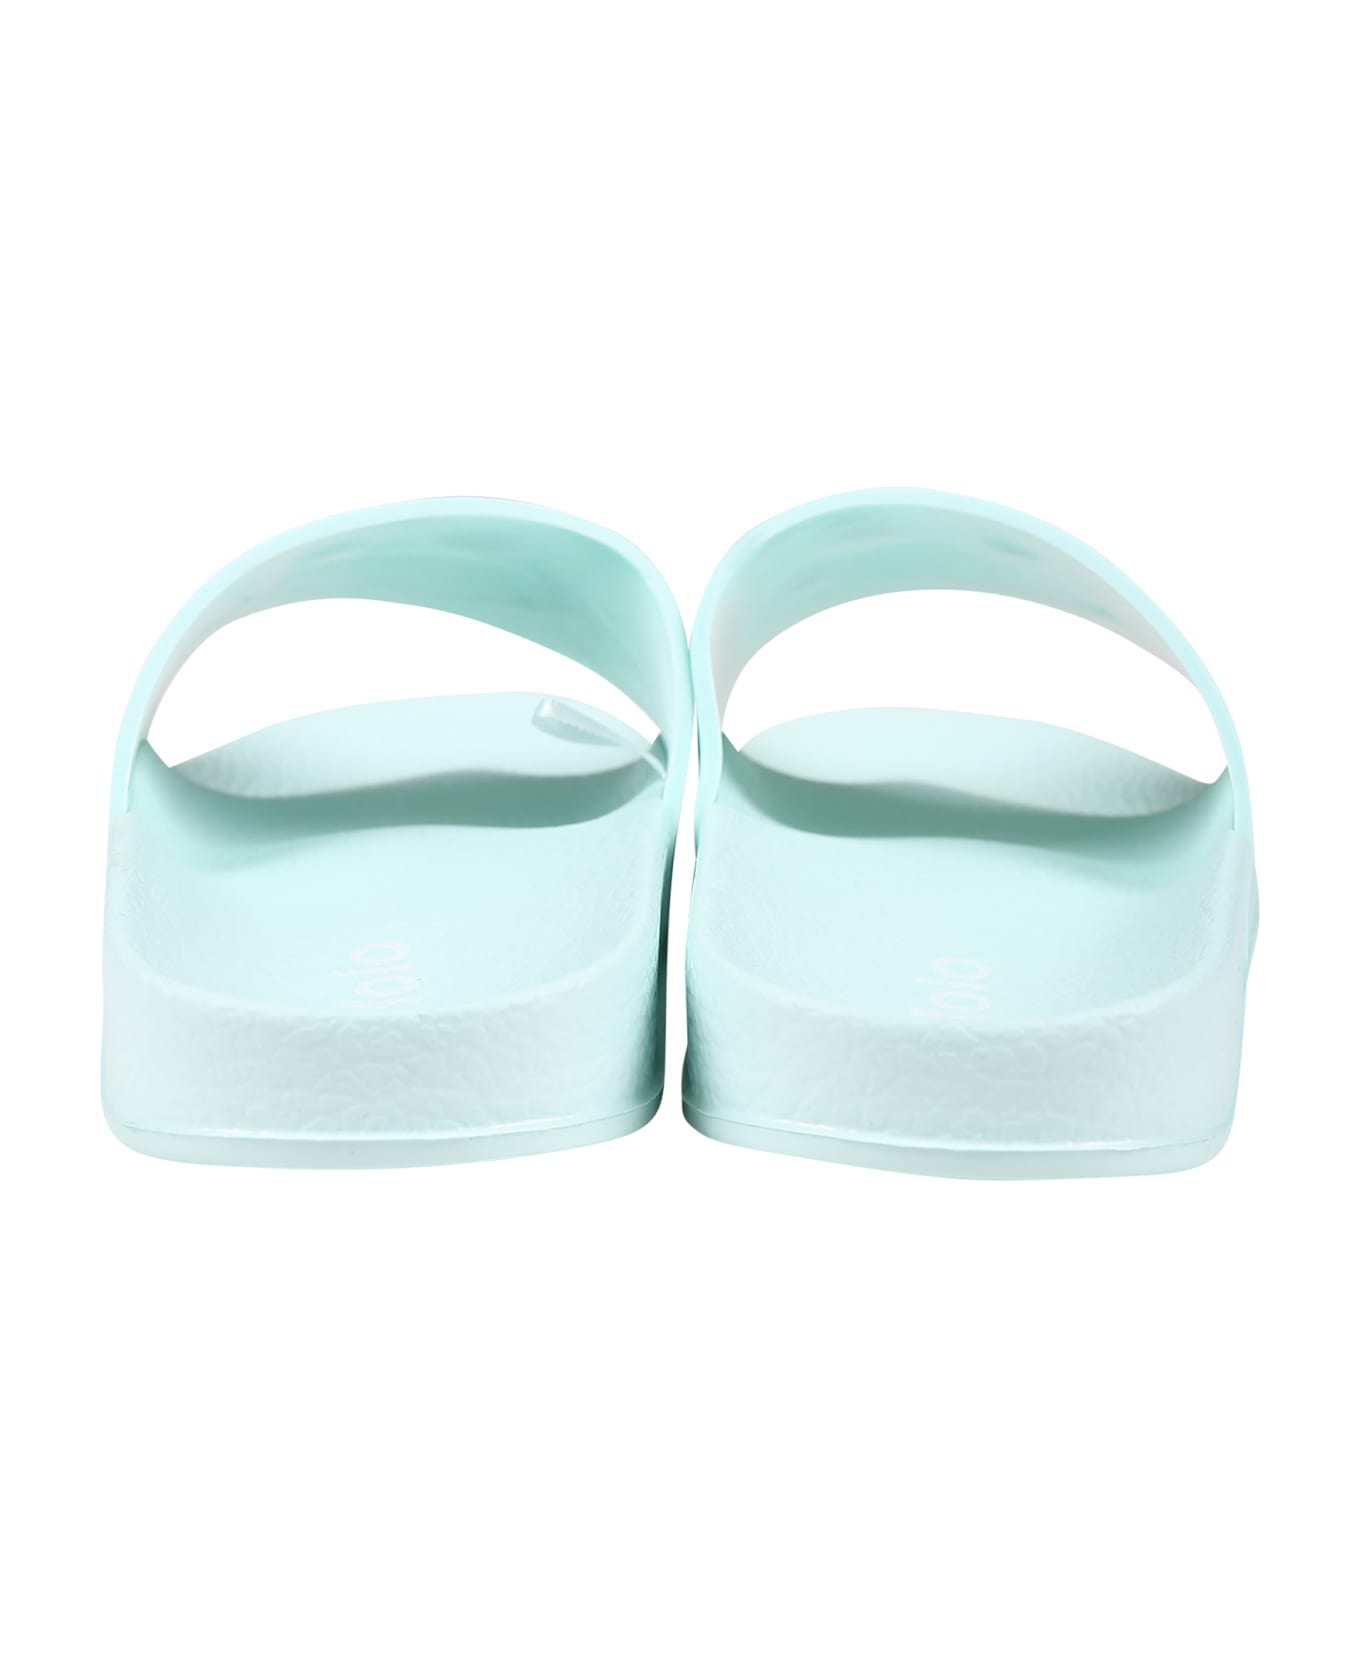 Molo Green Slippers For Kids With Smiley - Green